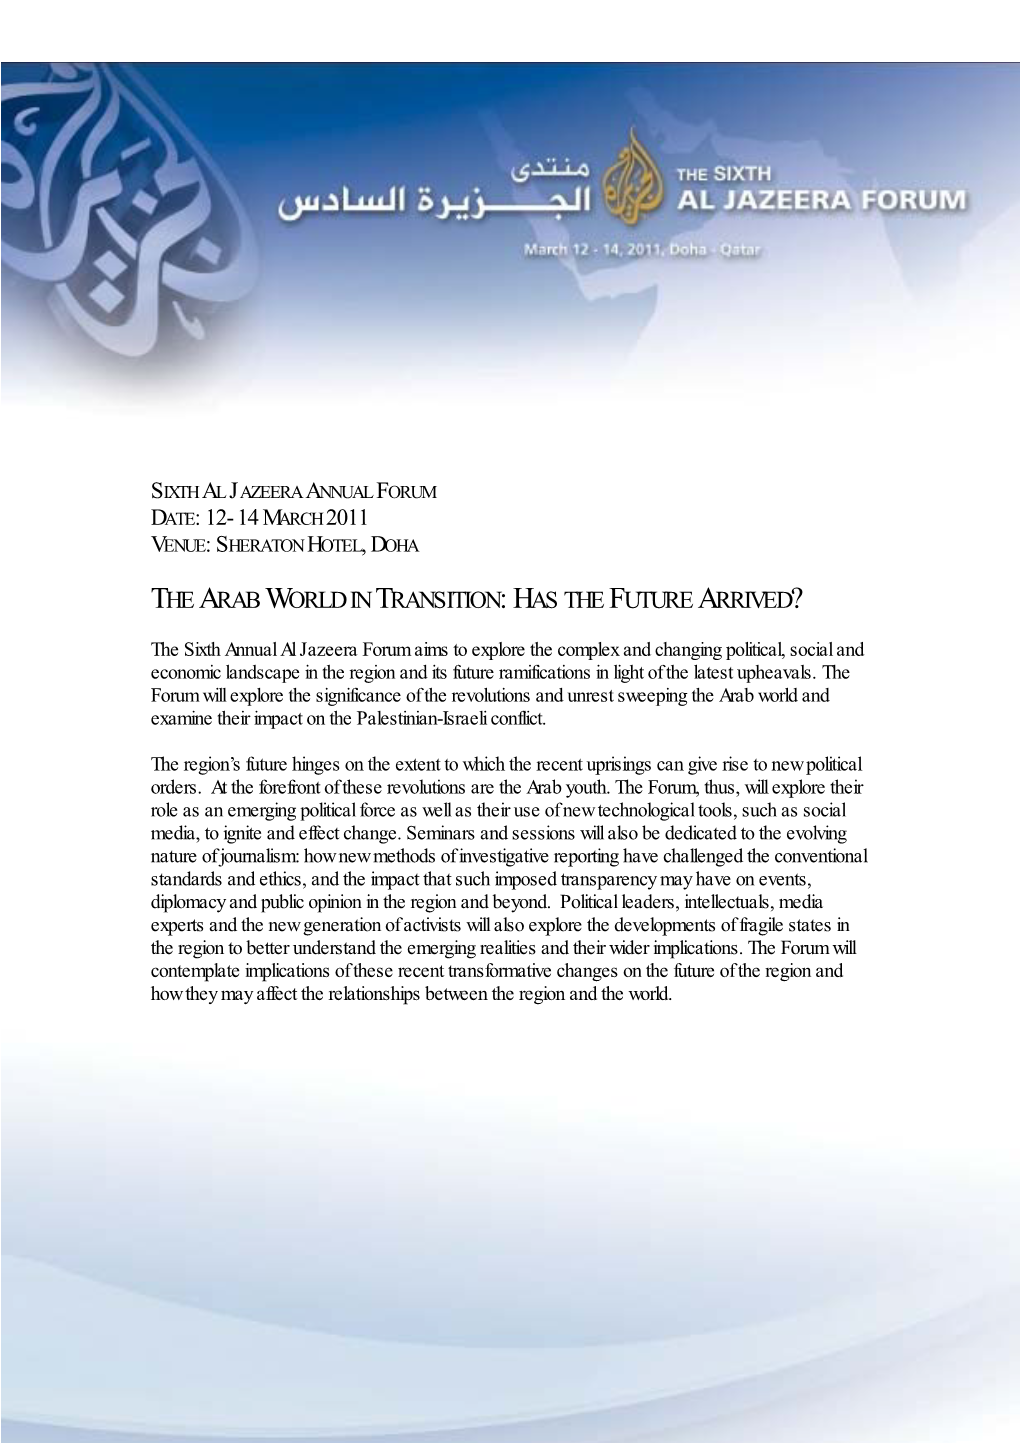 The Arab World in Transition: Has the Future Arrived?